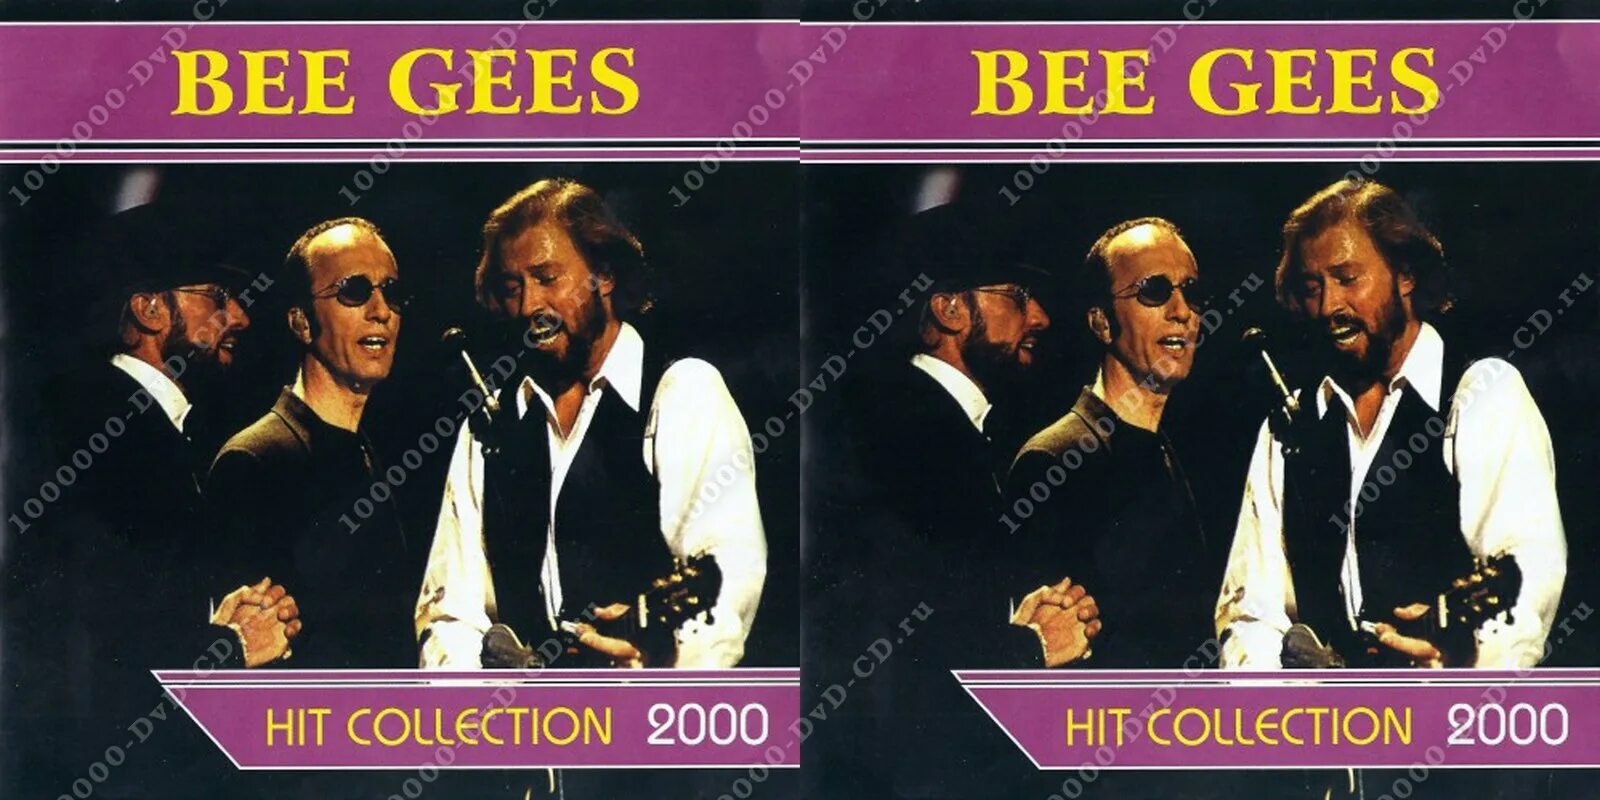 Обложка для mp3 Bee Gees. Bee Gees 2000. Fm 1996 Bee Gees. Bee Gees in 2000. 2000 collection